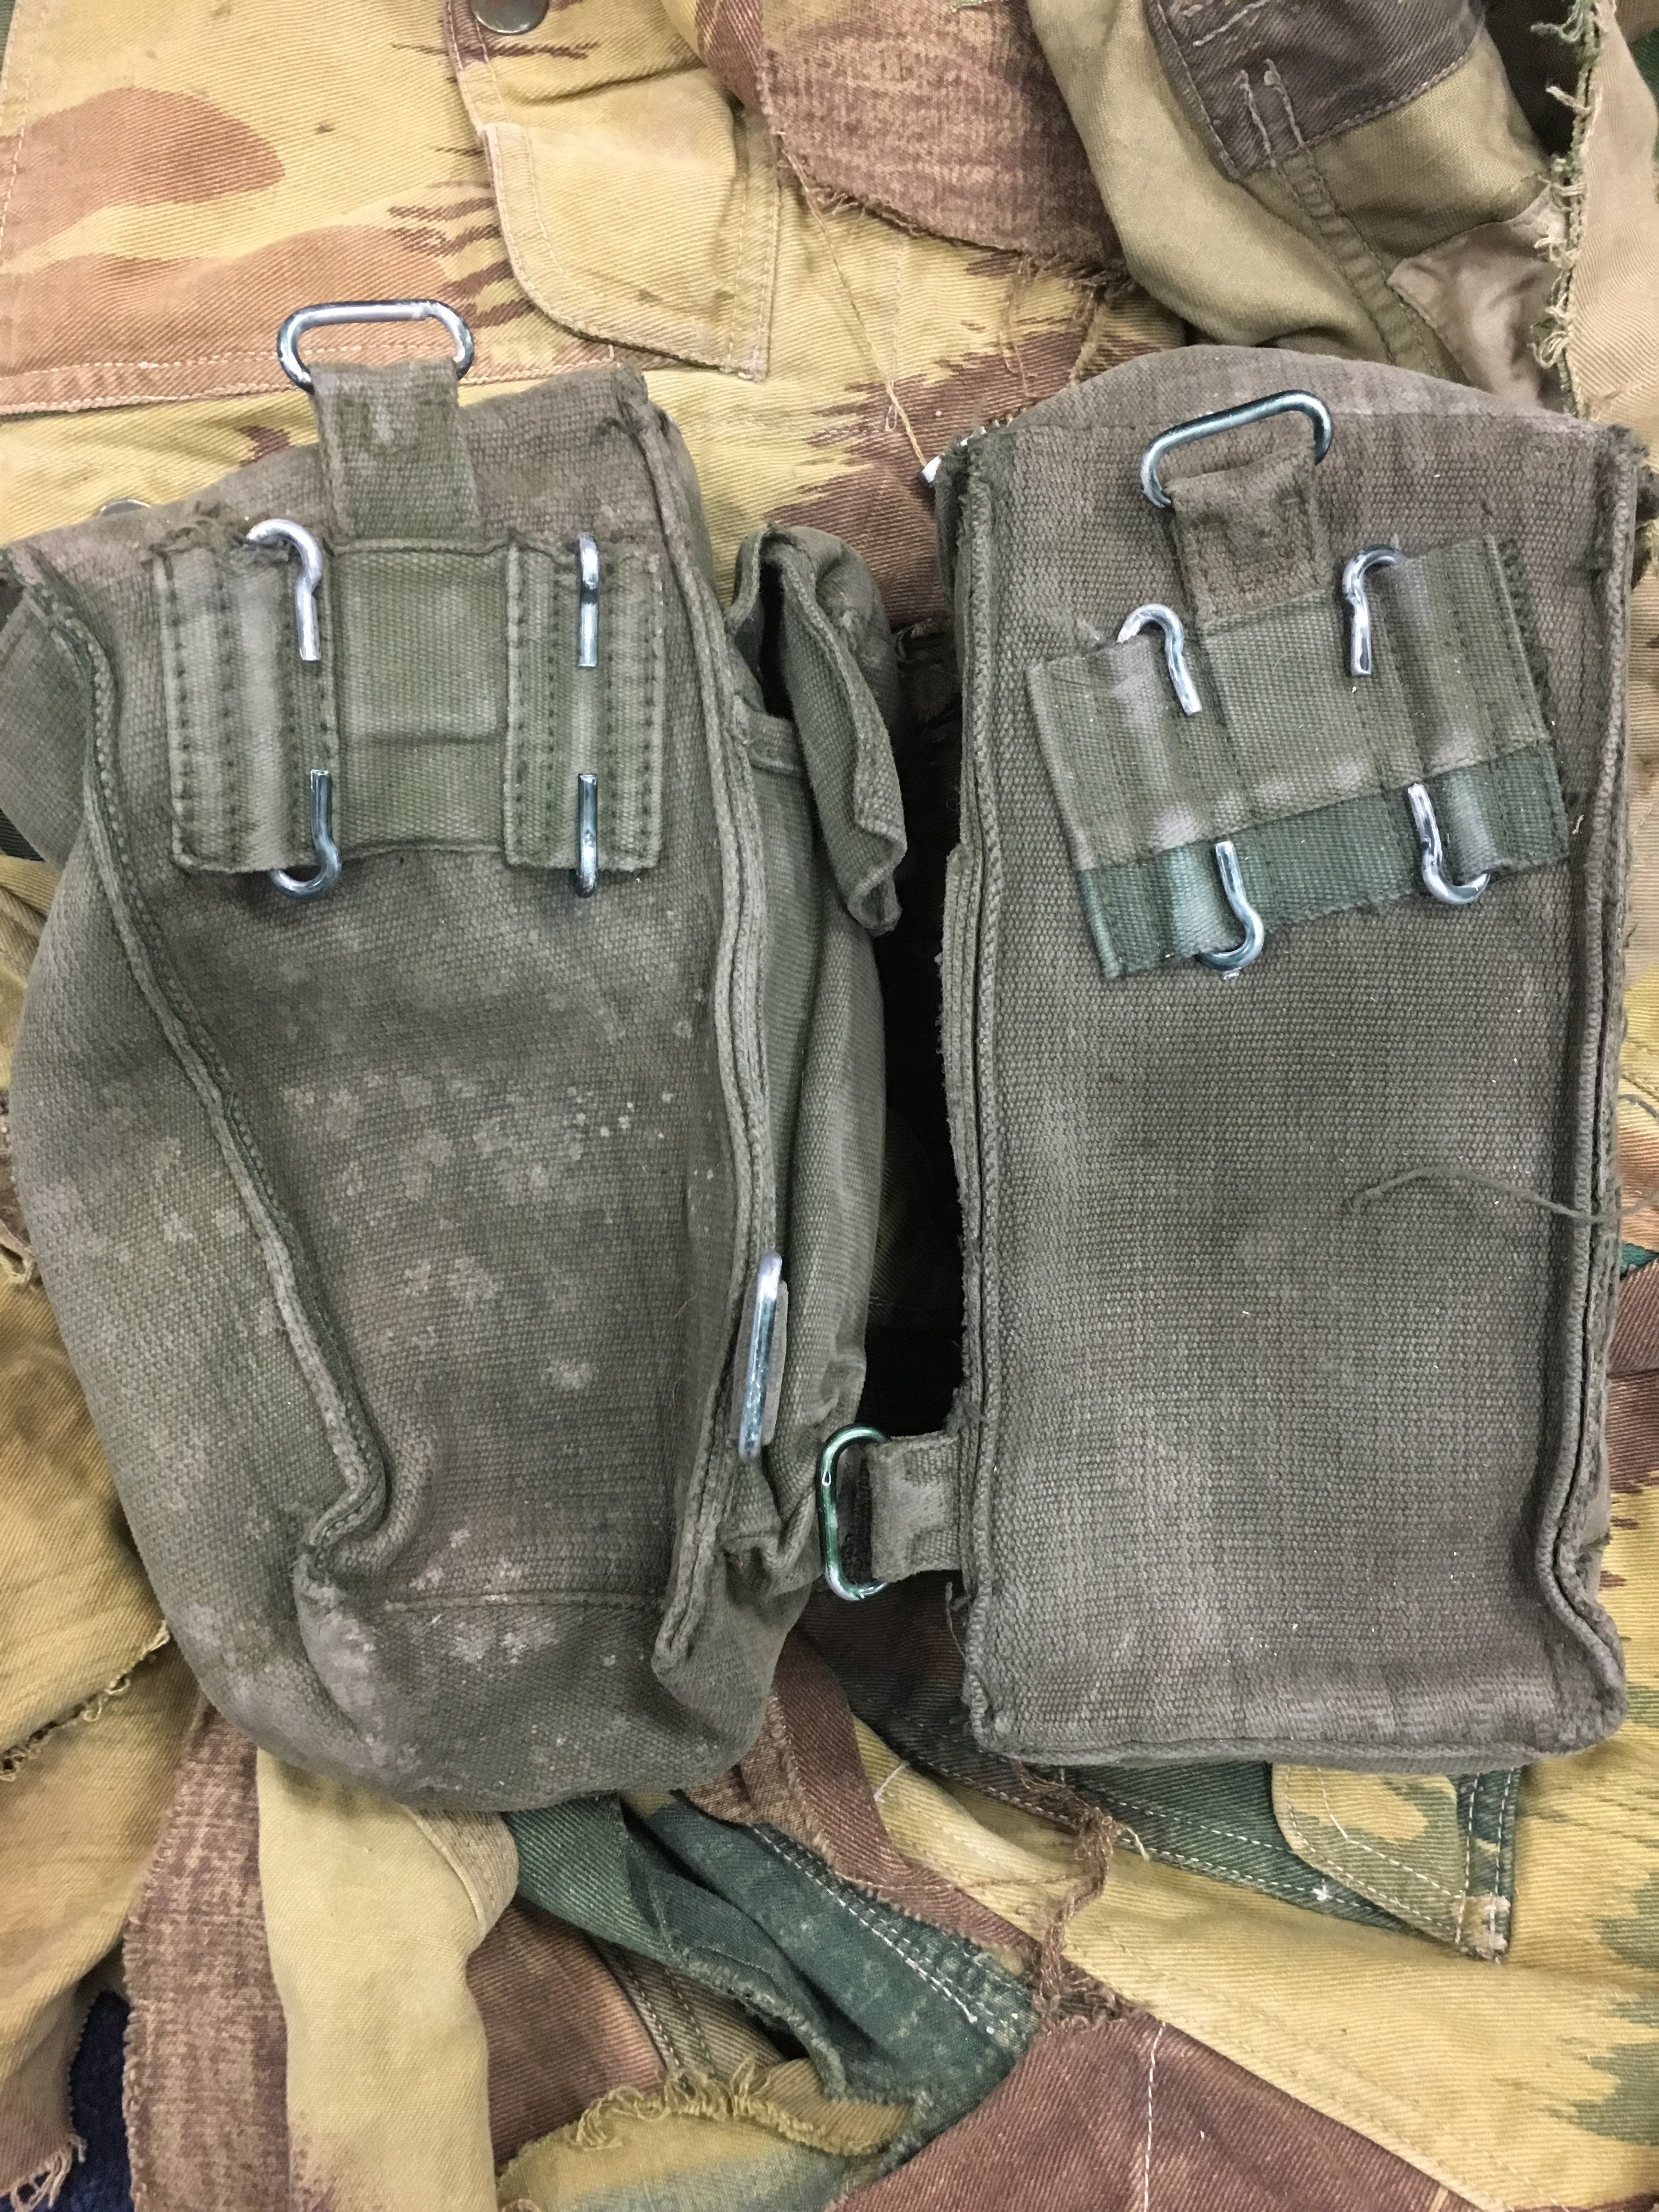 58 PATTERN RIGHT AMMO POUCH